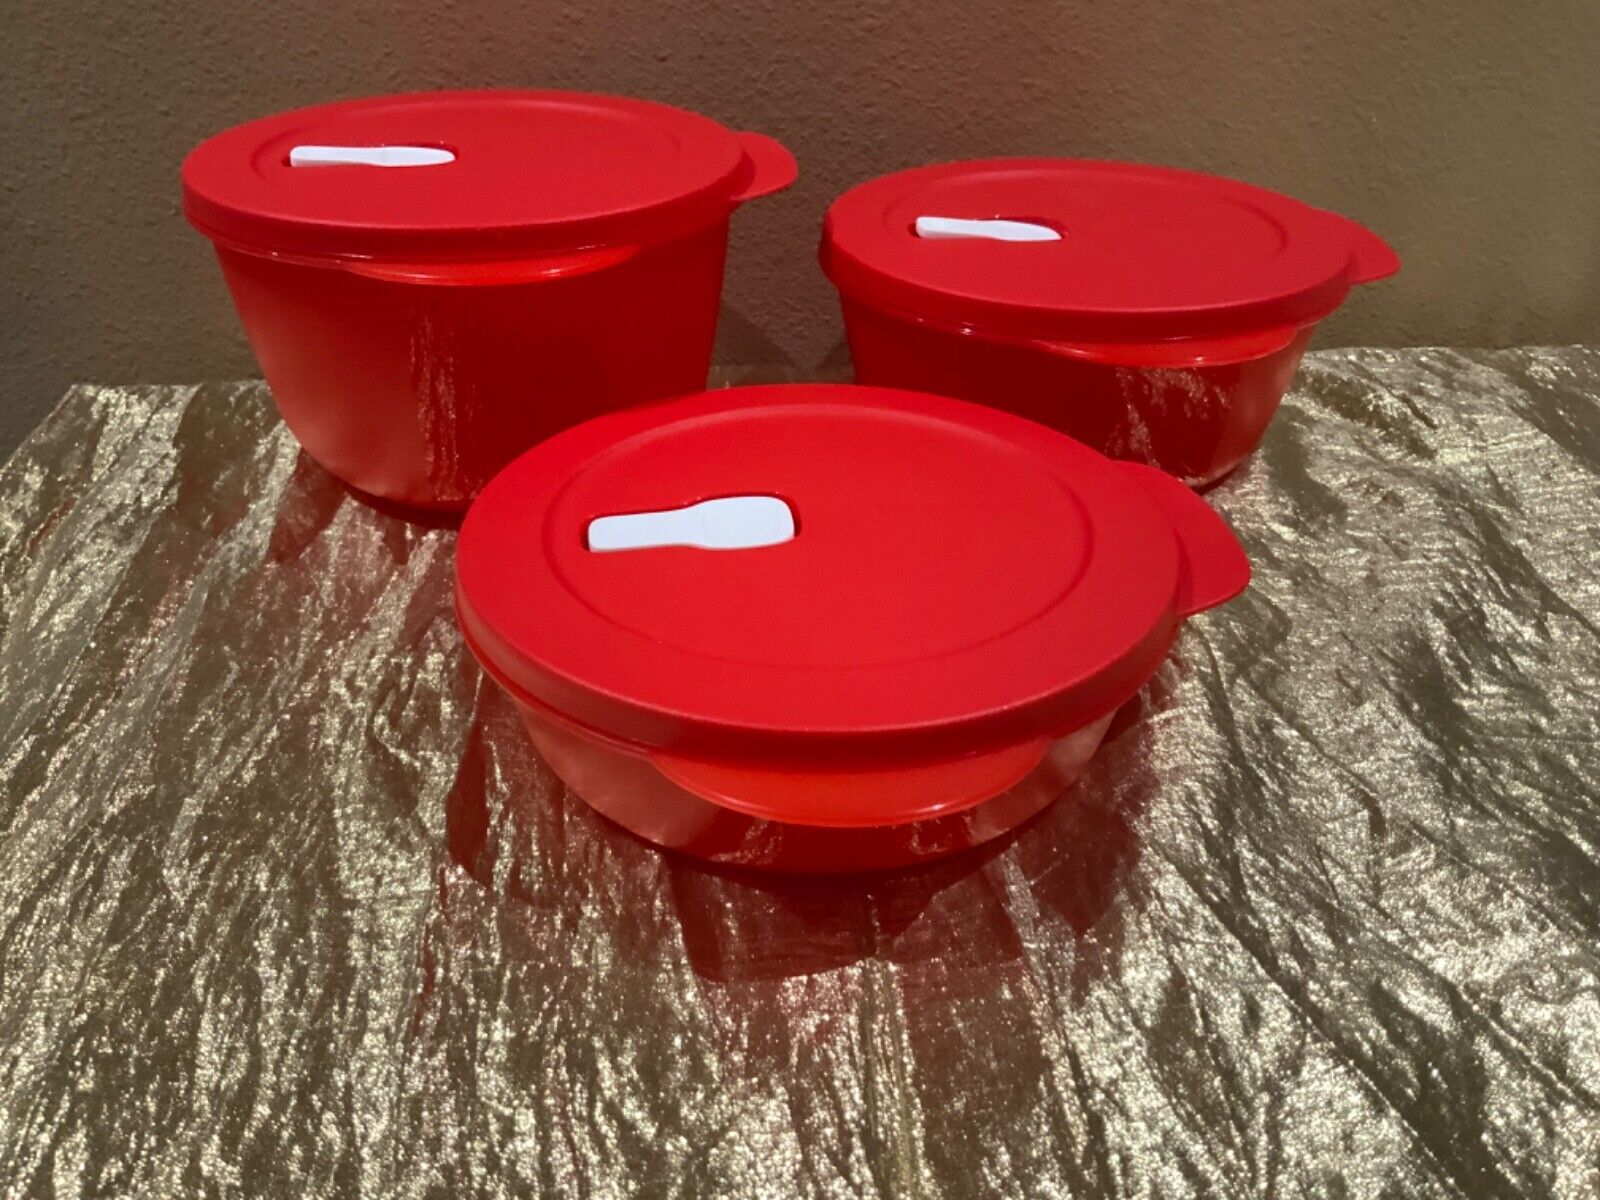 New Tupperware Set 3 Beautiful Red & White Colors Crystalwave Reheatable Bowls